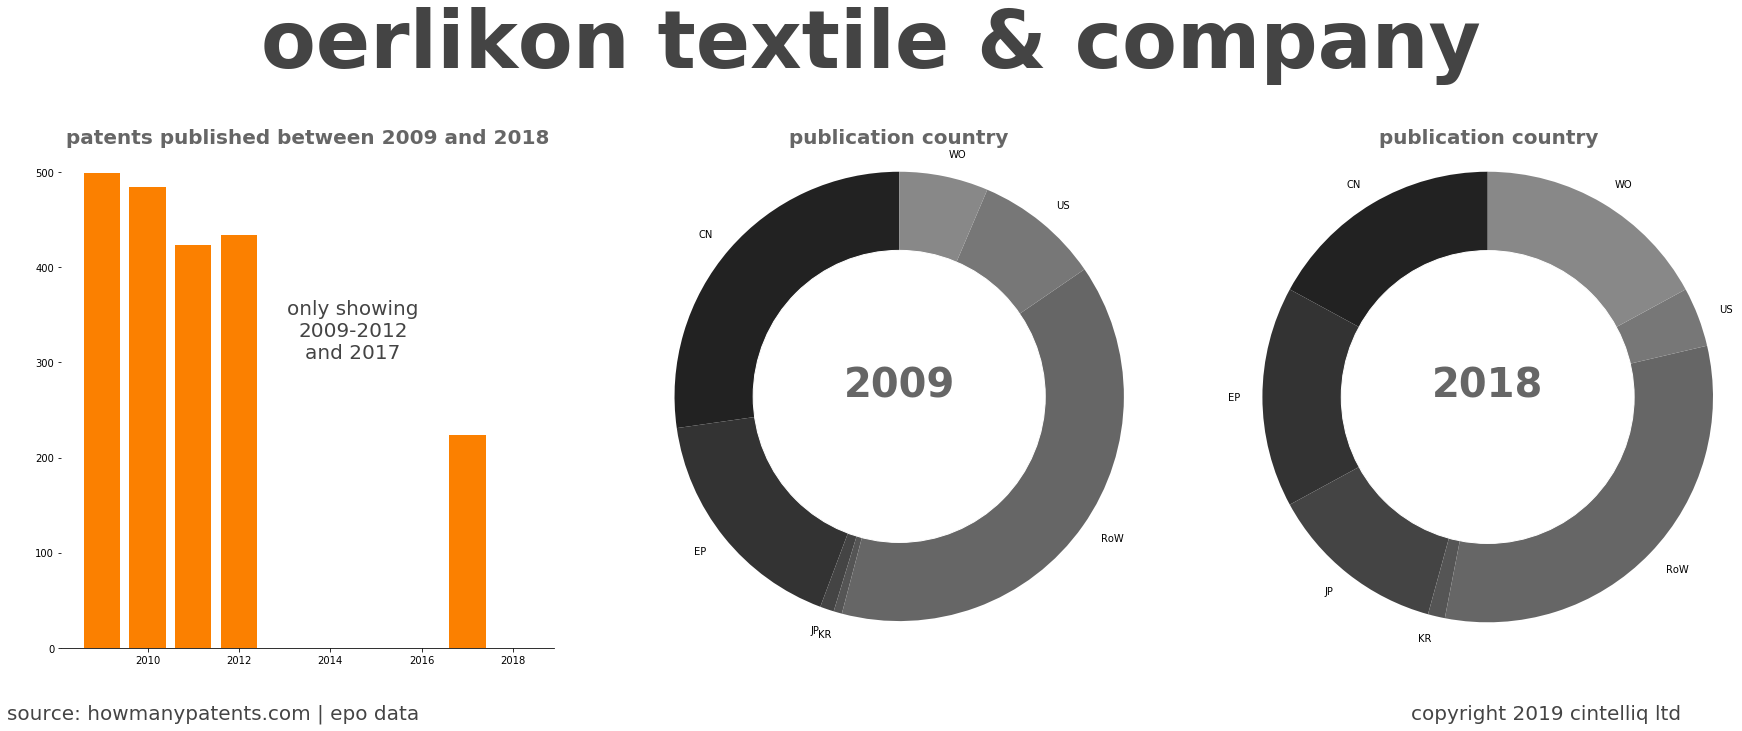 summary of patents for Oerlikon Textile & Company